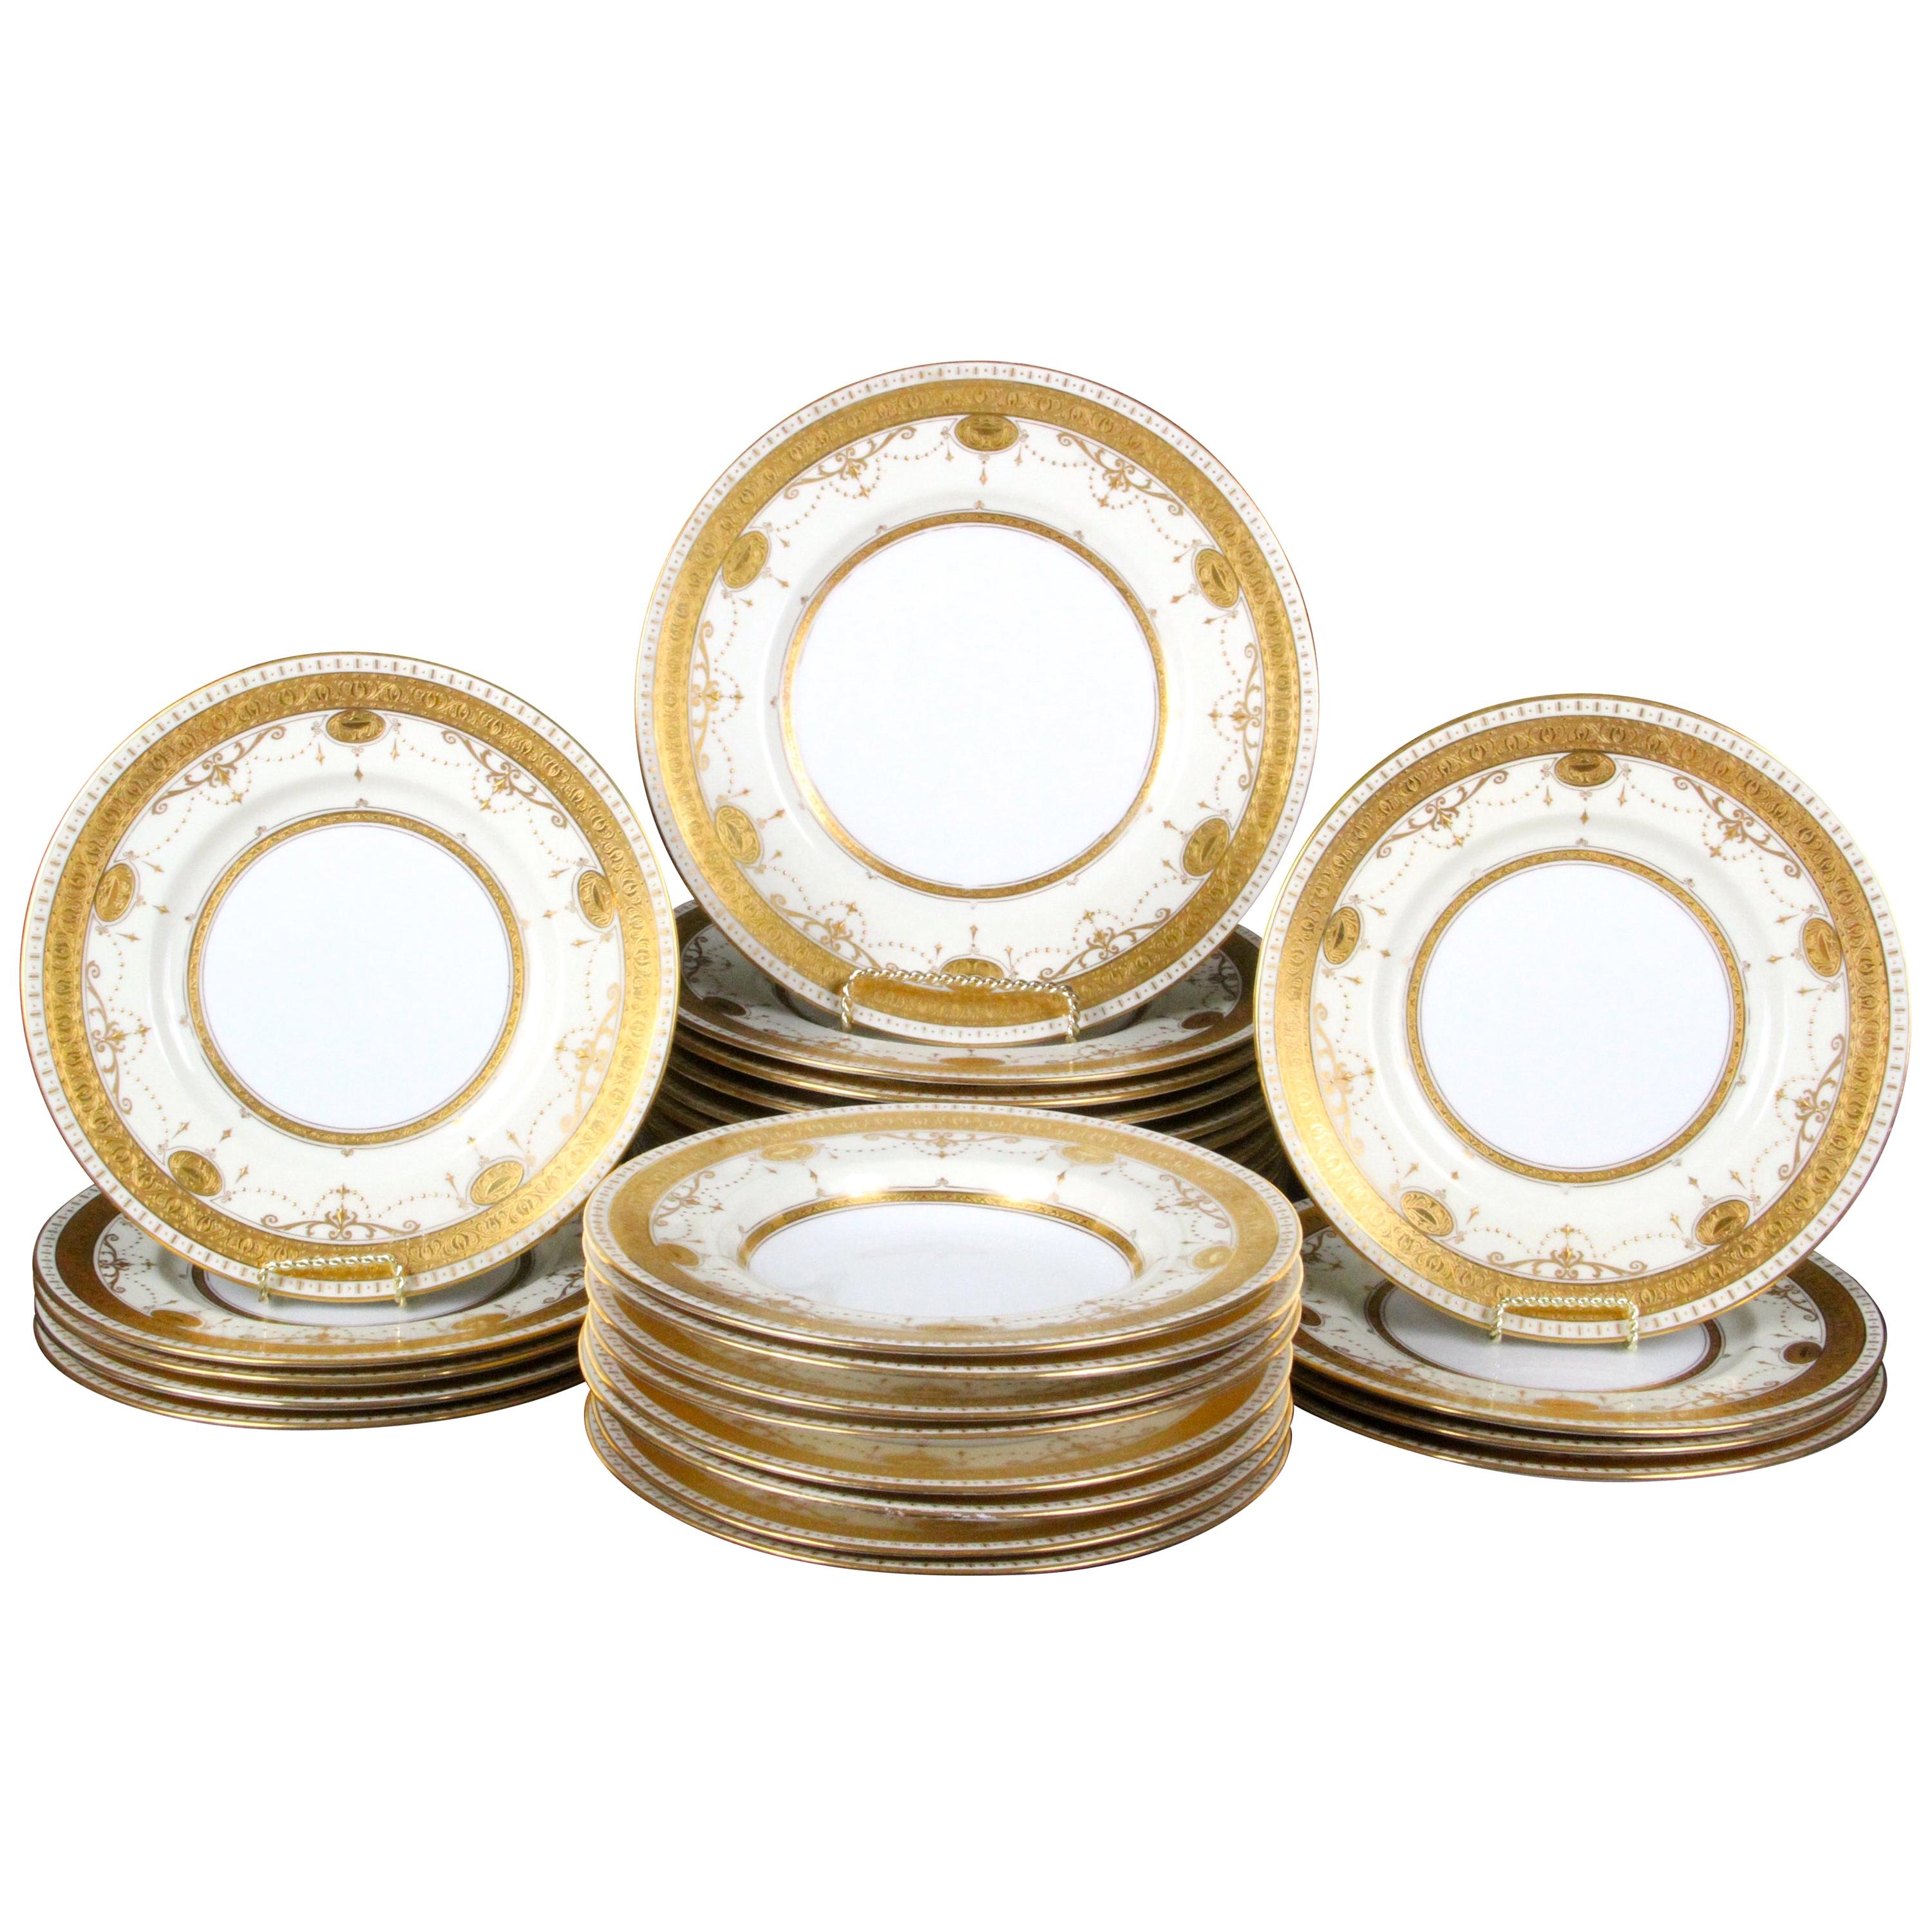 Service for 8 of Antique Minton for Tiffany Medallion Plates For Sale